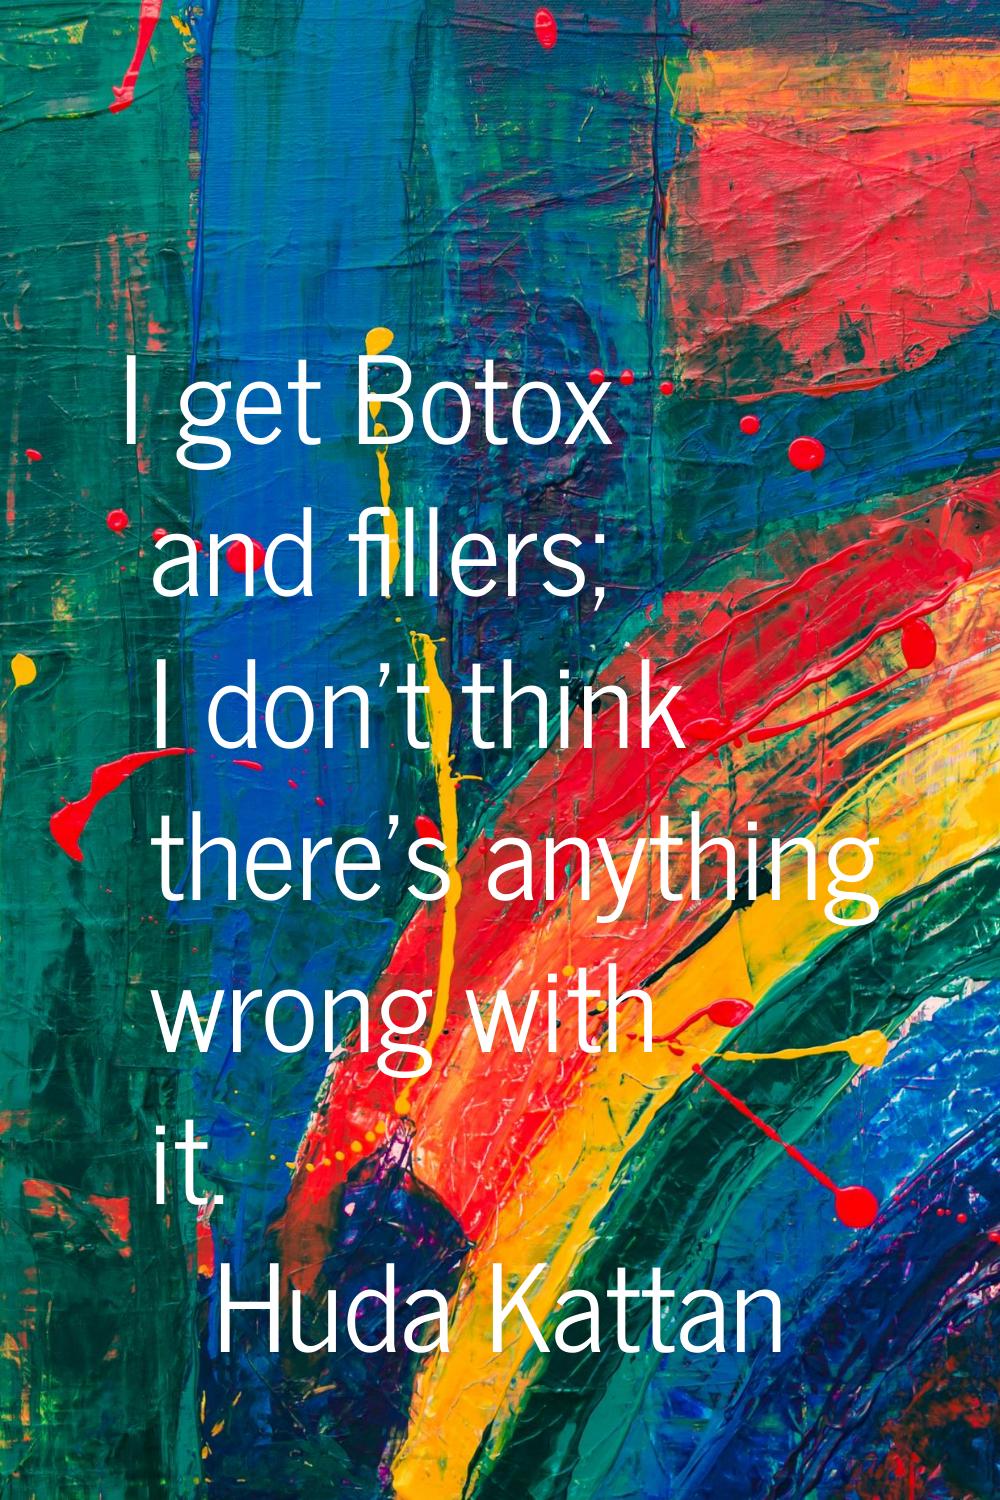 I get Botox and fillers; I don't think there's anything wrong with it.